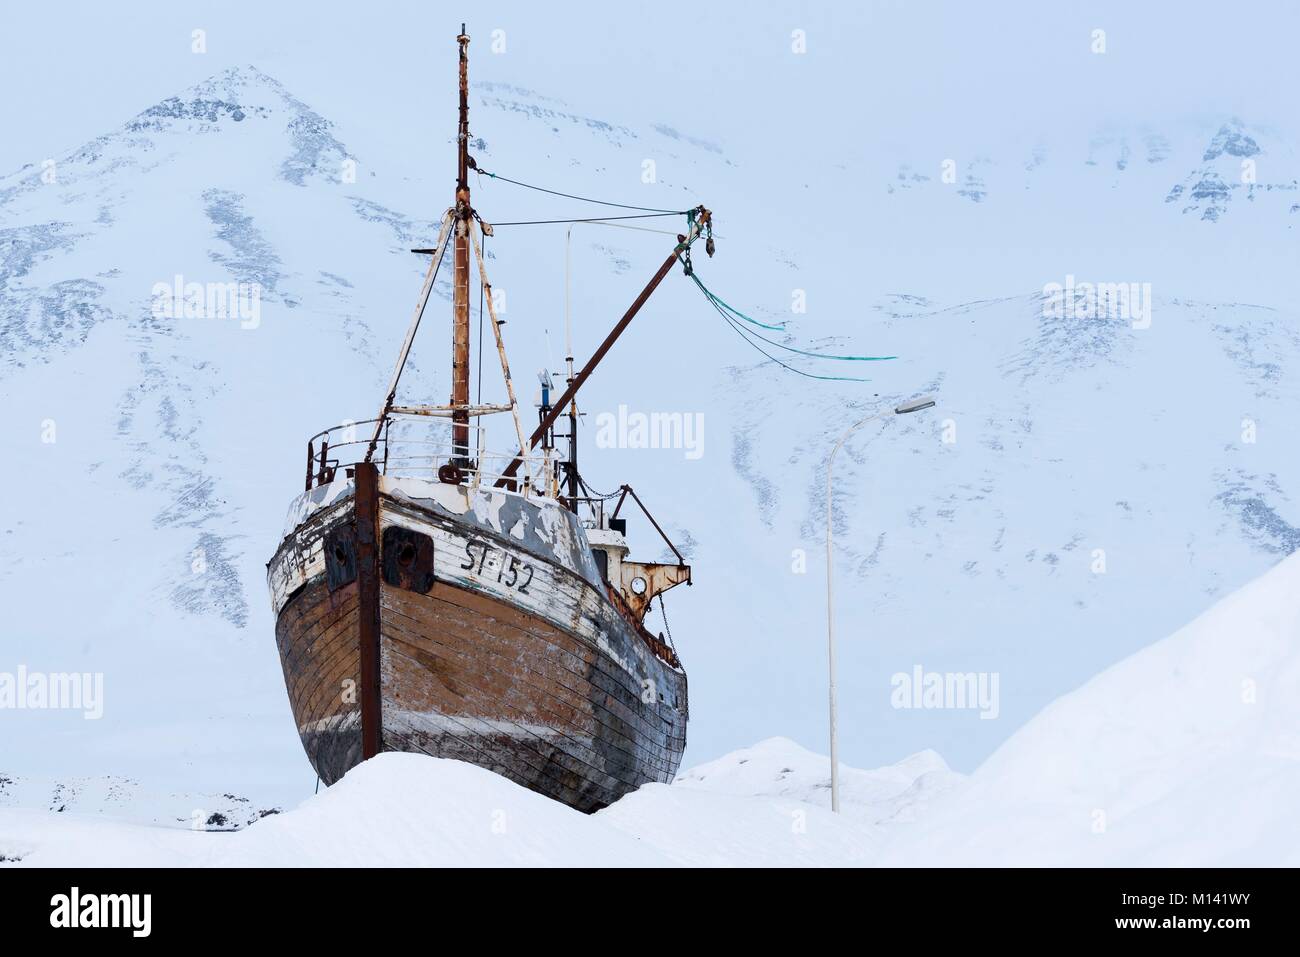 Iceland, North west Iceland, Siglufjordur, Boat on the land in winter Stock Photo